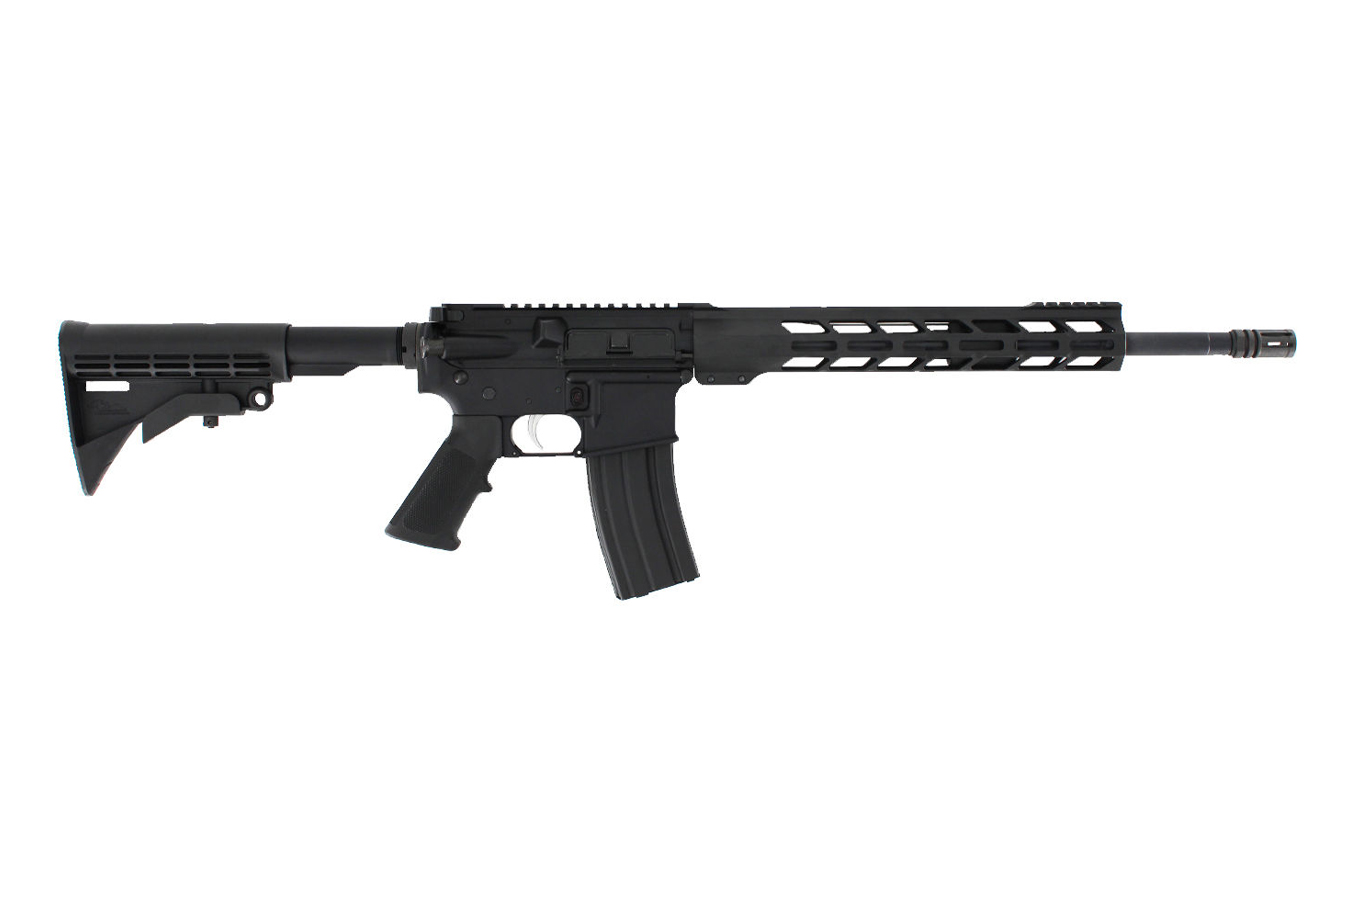 No. 14 Best Selling: ANDERSON MANUFACTURING AM-15 5.56MM SEMI-AUTOMATIC RIFLE WITH 13-INCH M-LOK HANDGUARD